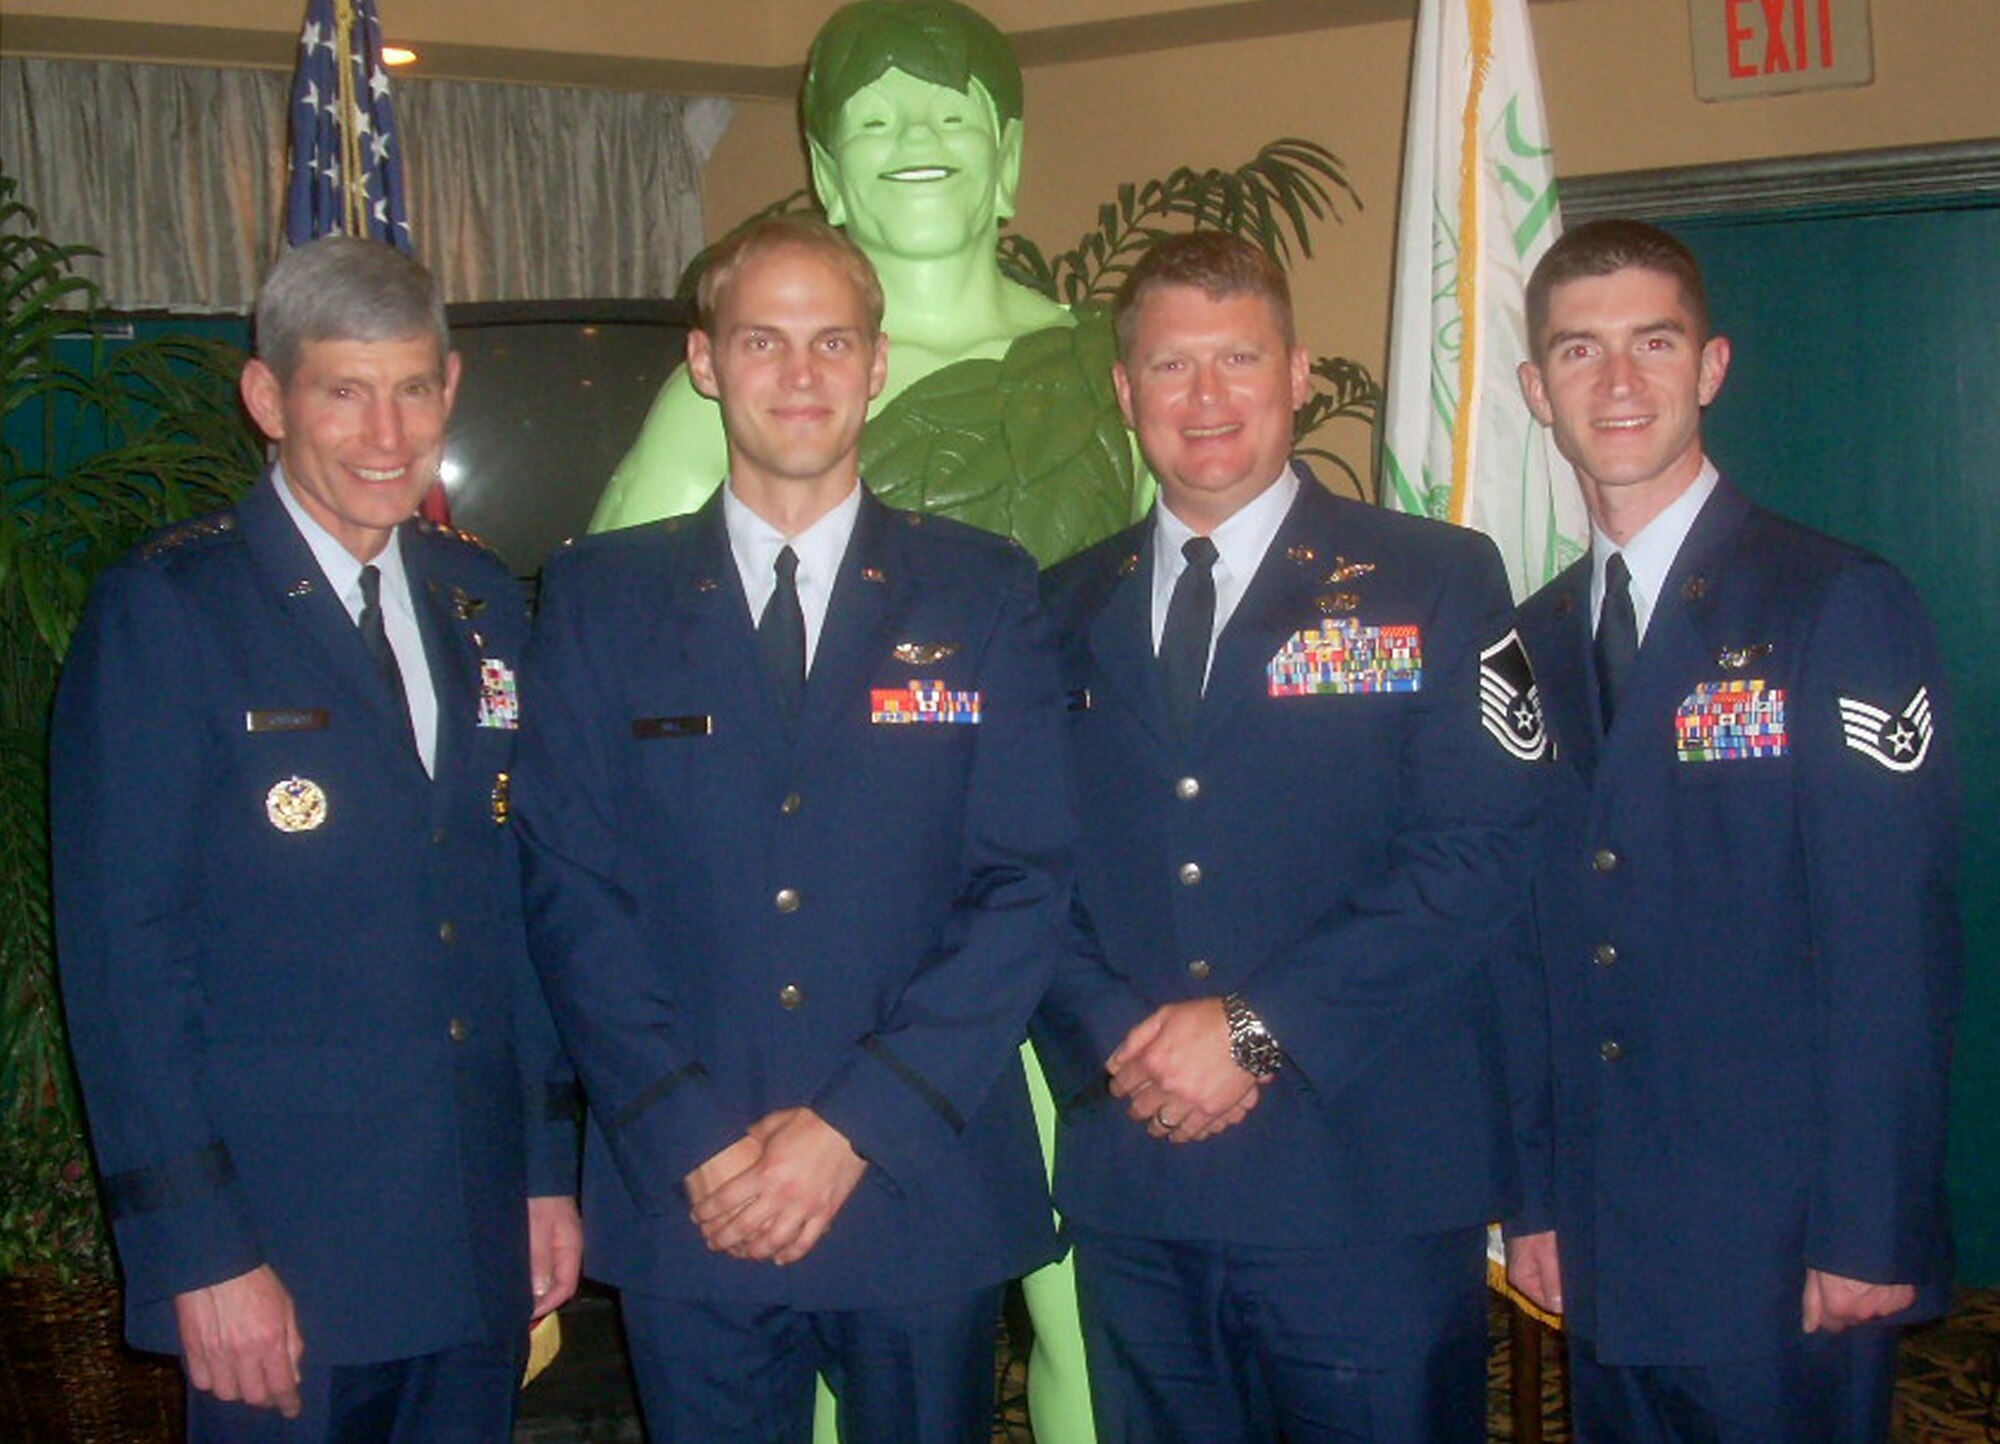 Air Force Chief of Staff, Gen. Norton Schwartz stands with three of the four members of Pedro 16, an HH-60G Pavehawk crew from the 33rd Rescue Squadron at Kadena Air Base Japan, May 1, 2010 in Fort Walton Beach, Fla. The crew was honored with the Jolly Green Association Award at this event for a mission to rescue Army Soldiers and fellow Airmen July 29, 2009 during their deployment to Kandahar Air Base, Afghanistan. They were subsequently named as the winners of the MacKay trophy for that same mission. Pictured with Gen. Schwartz from left to right are 1st Lt. Lucas Will, Master Sgt. Dustin Thomas, and Staff Sgt. Tim Philpott. Not pictured is Capt Robert Rosebrough. (Courtesy Photo)